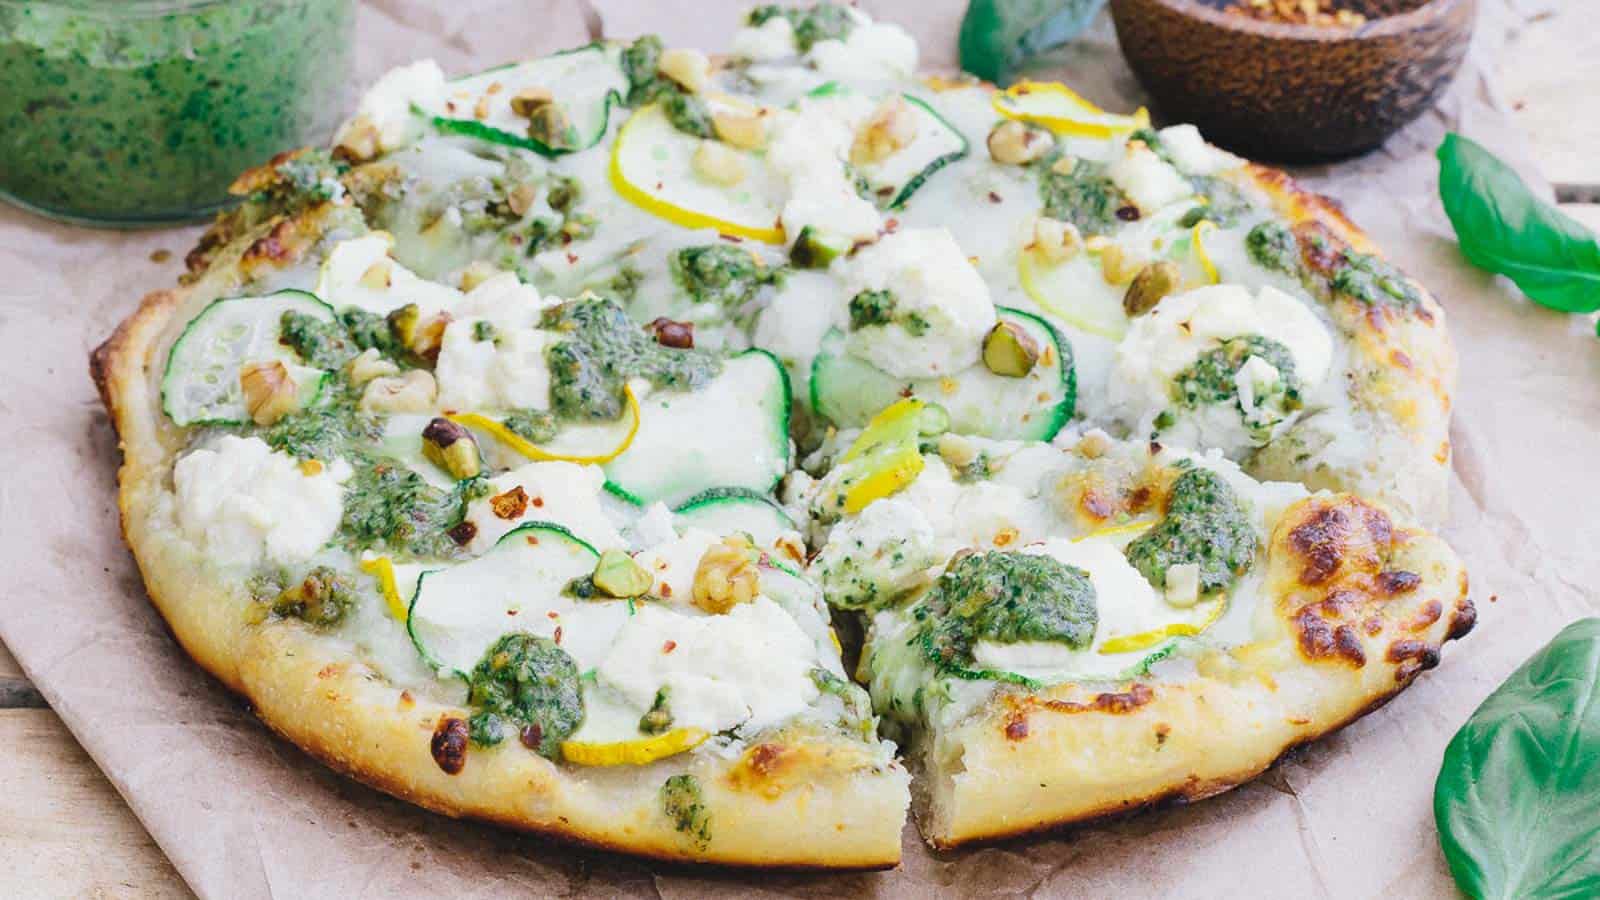 White pesto pizza with zucchini on a wooden surface.